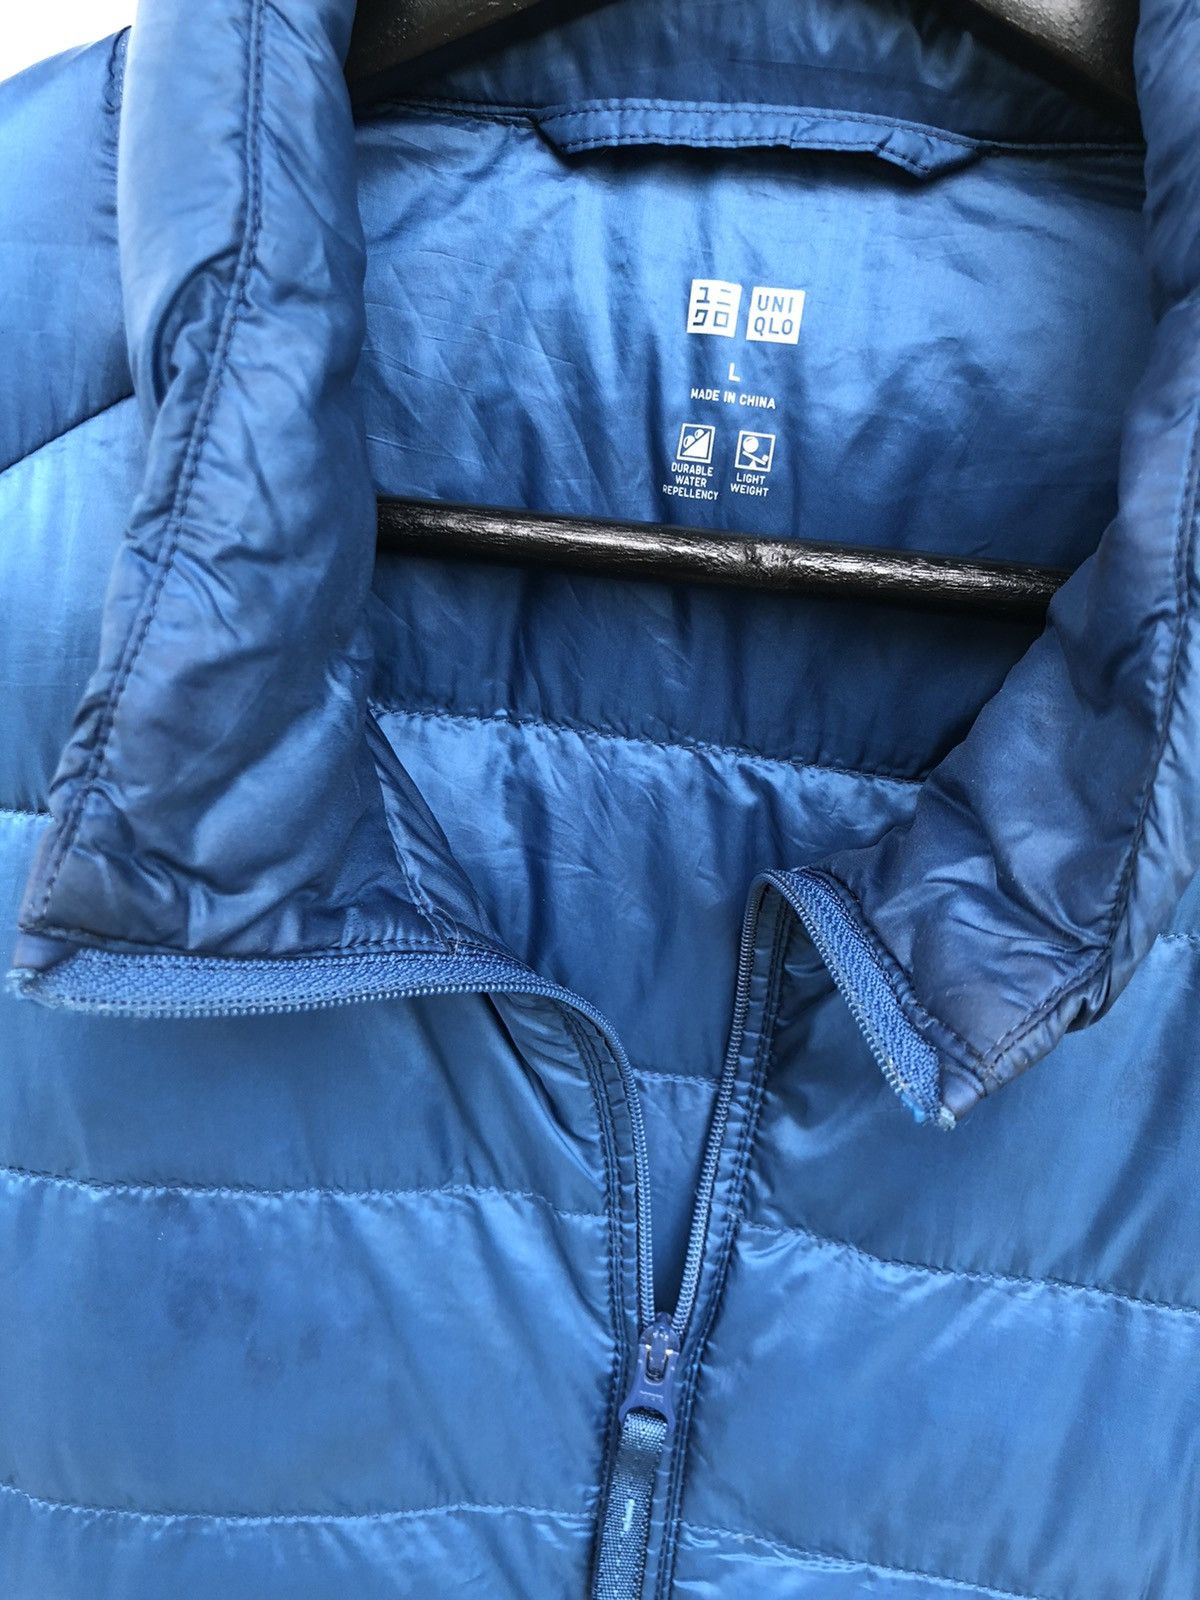 Uniqlo Puffer Quilted Jacket Size US S / EU 44-46 / 1 - 4 Thumbnail